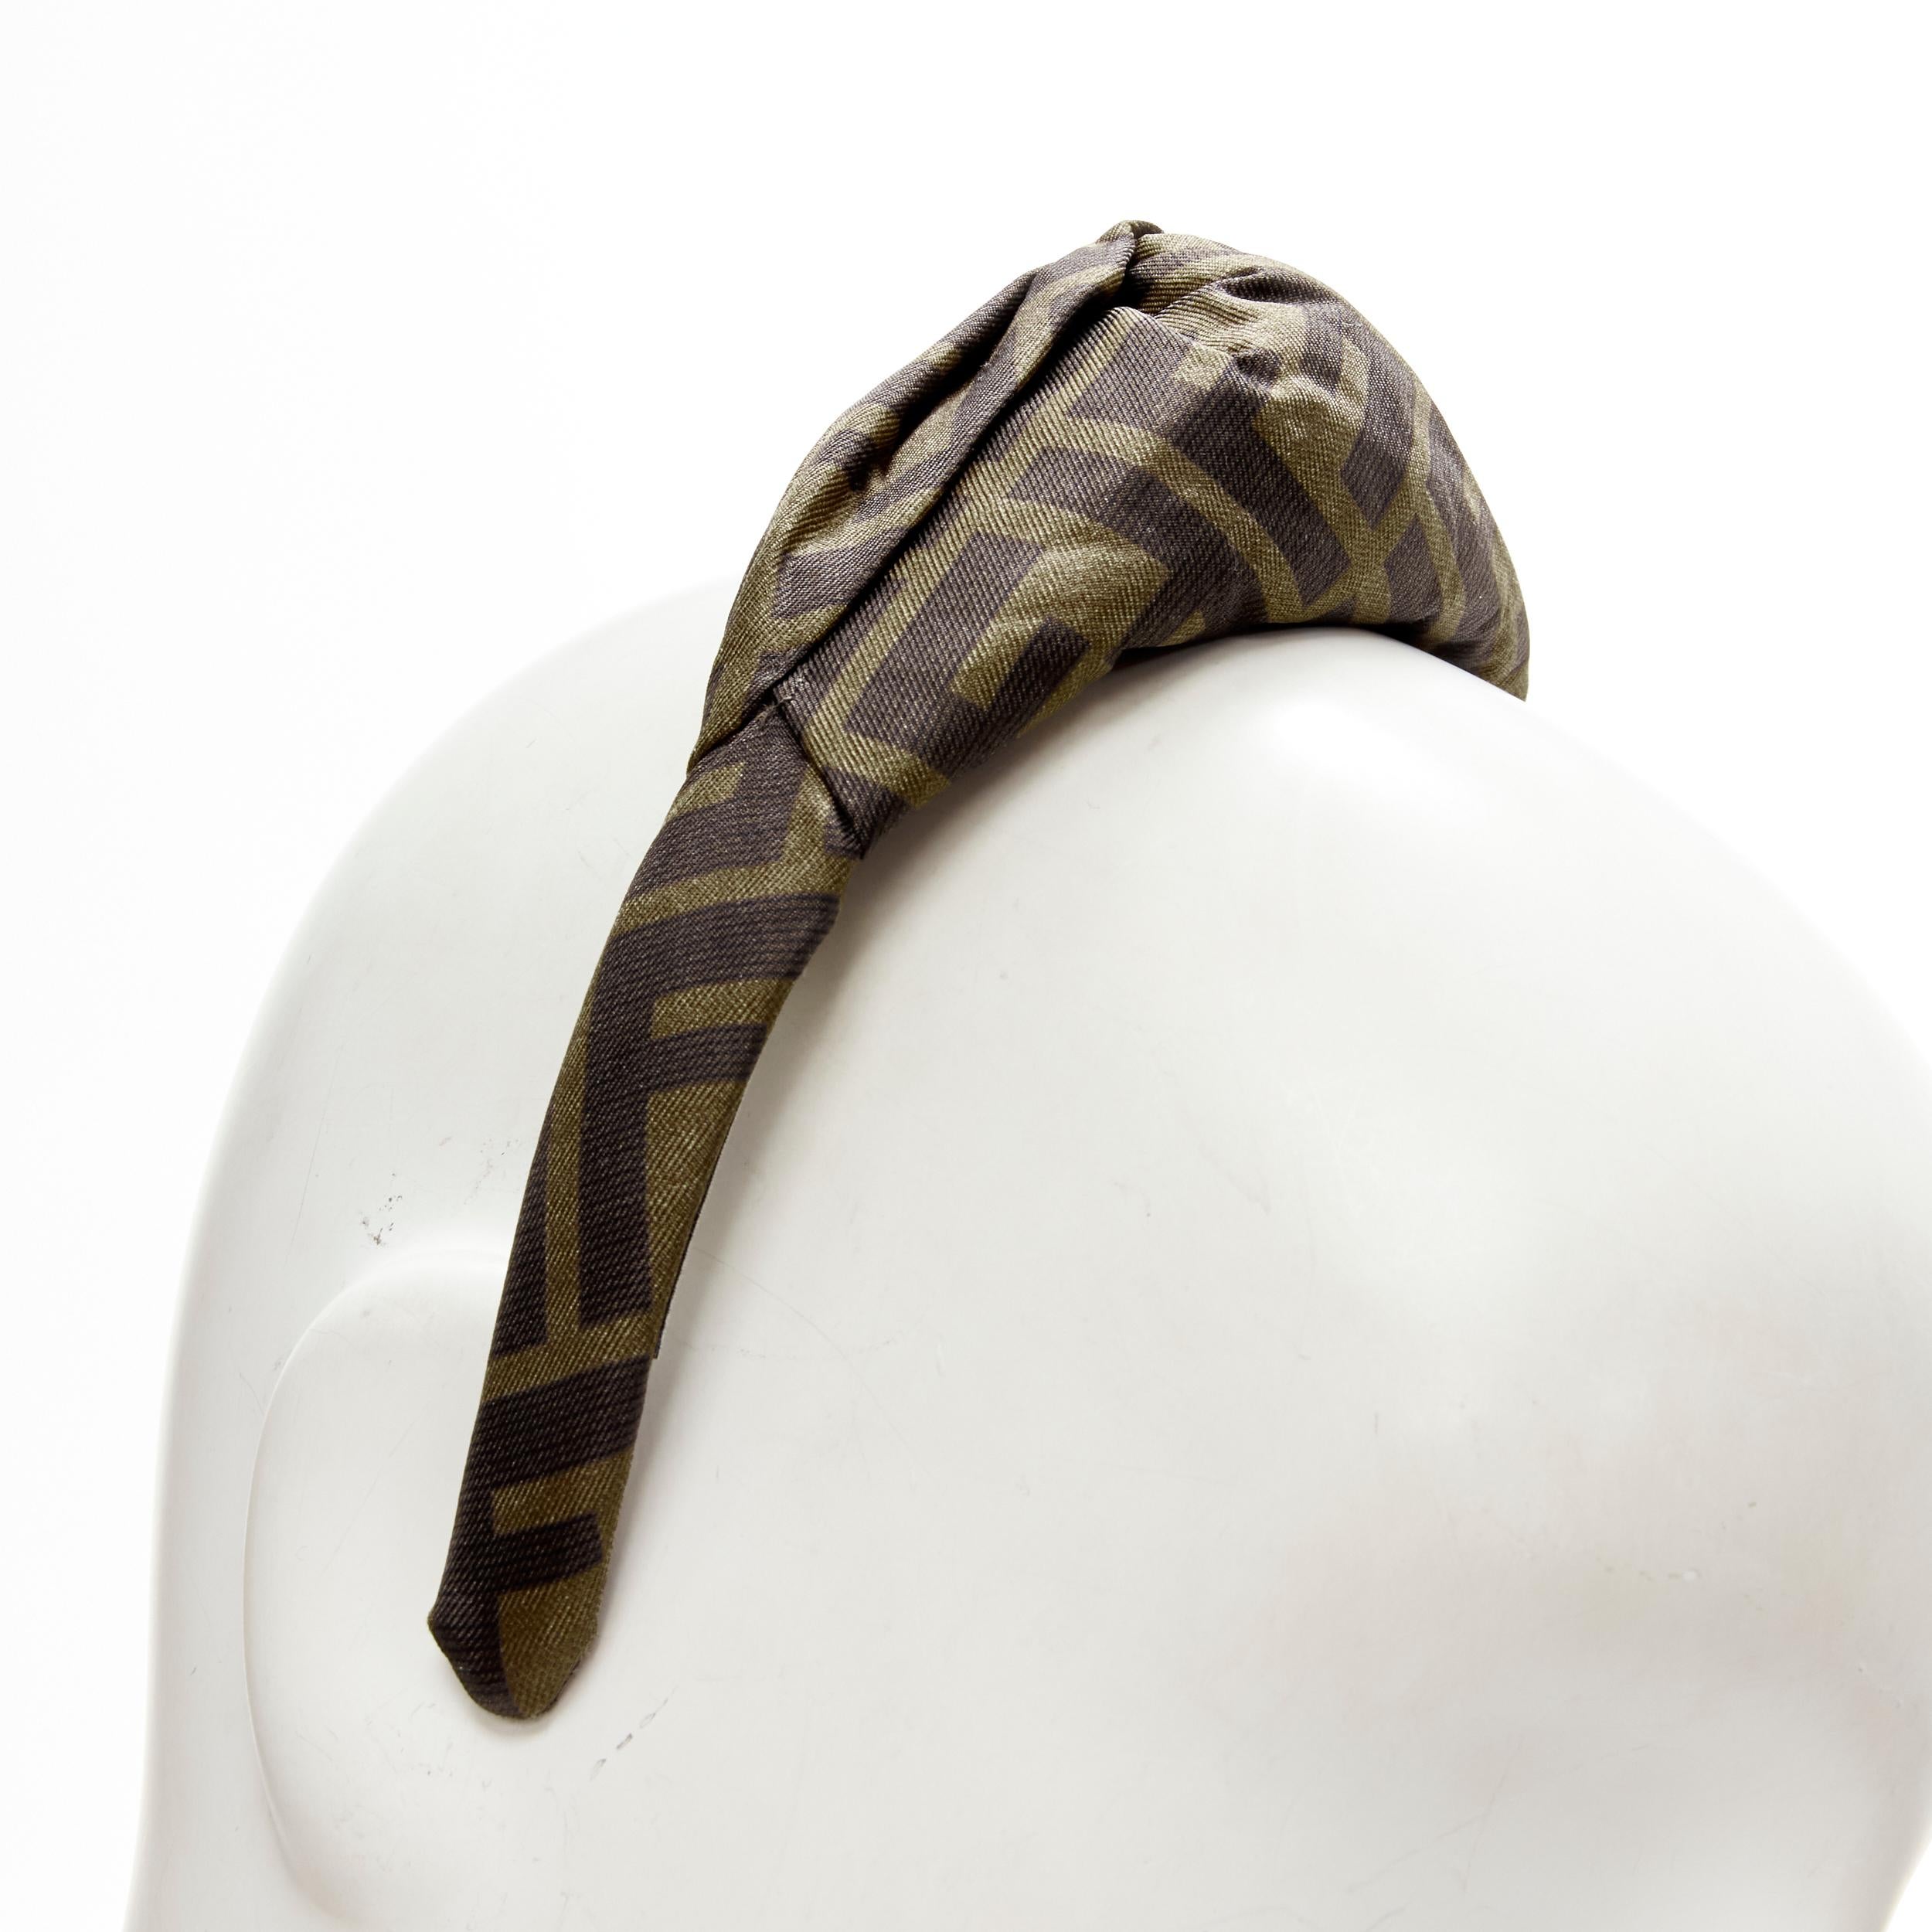 FENDI Forever FF brown Zucca monogram fabric rosette headband 
Reference: ANWU/A00128 
Brand: Fendi 
Collection: Forever FF 
Material: Fabric 
Color: Brown 
Pattern: Monogram 
Made in: Italy 


CONDITION: 
Condition: Excellent, this item was